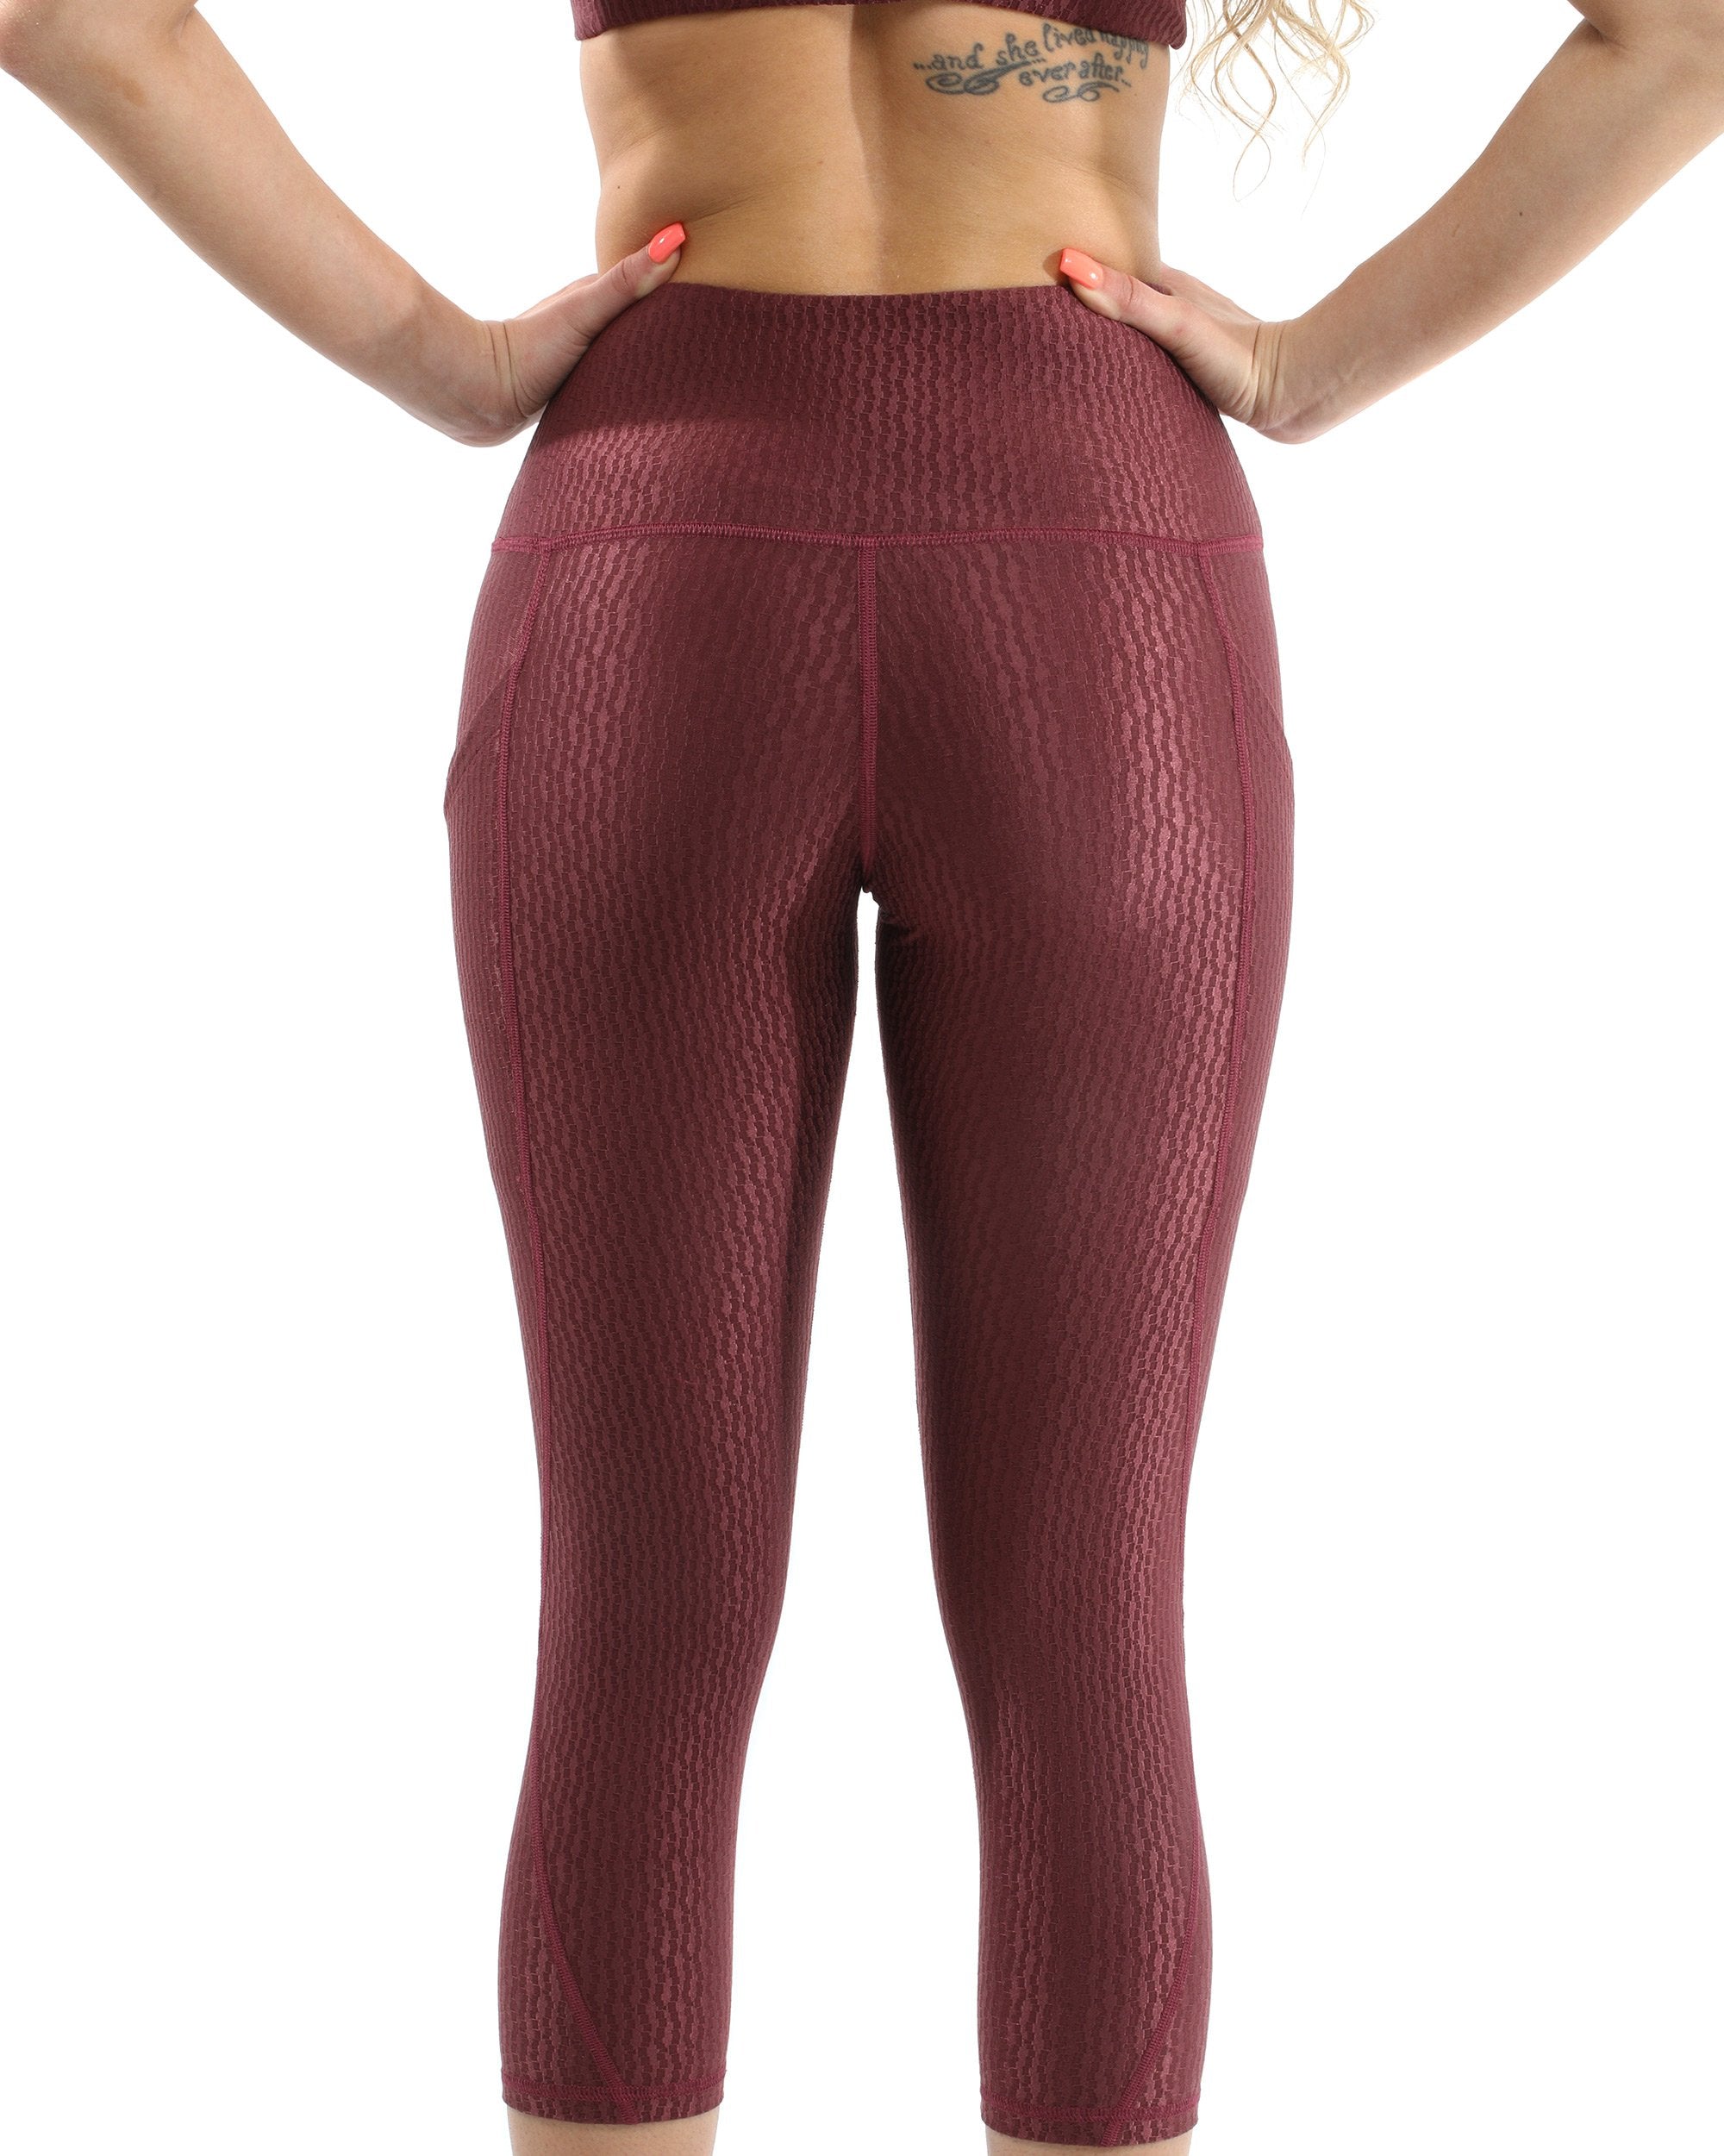 SALE! 50% OFF! Verona Activewear Set - Leggings & Sports Bra - Maroon [MADE IN ITALY] - Size Small